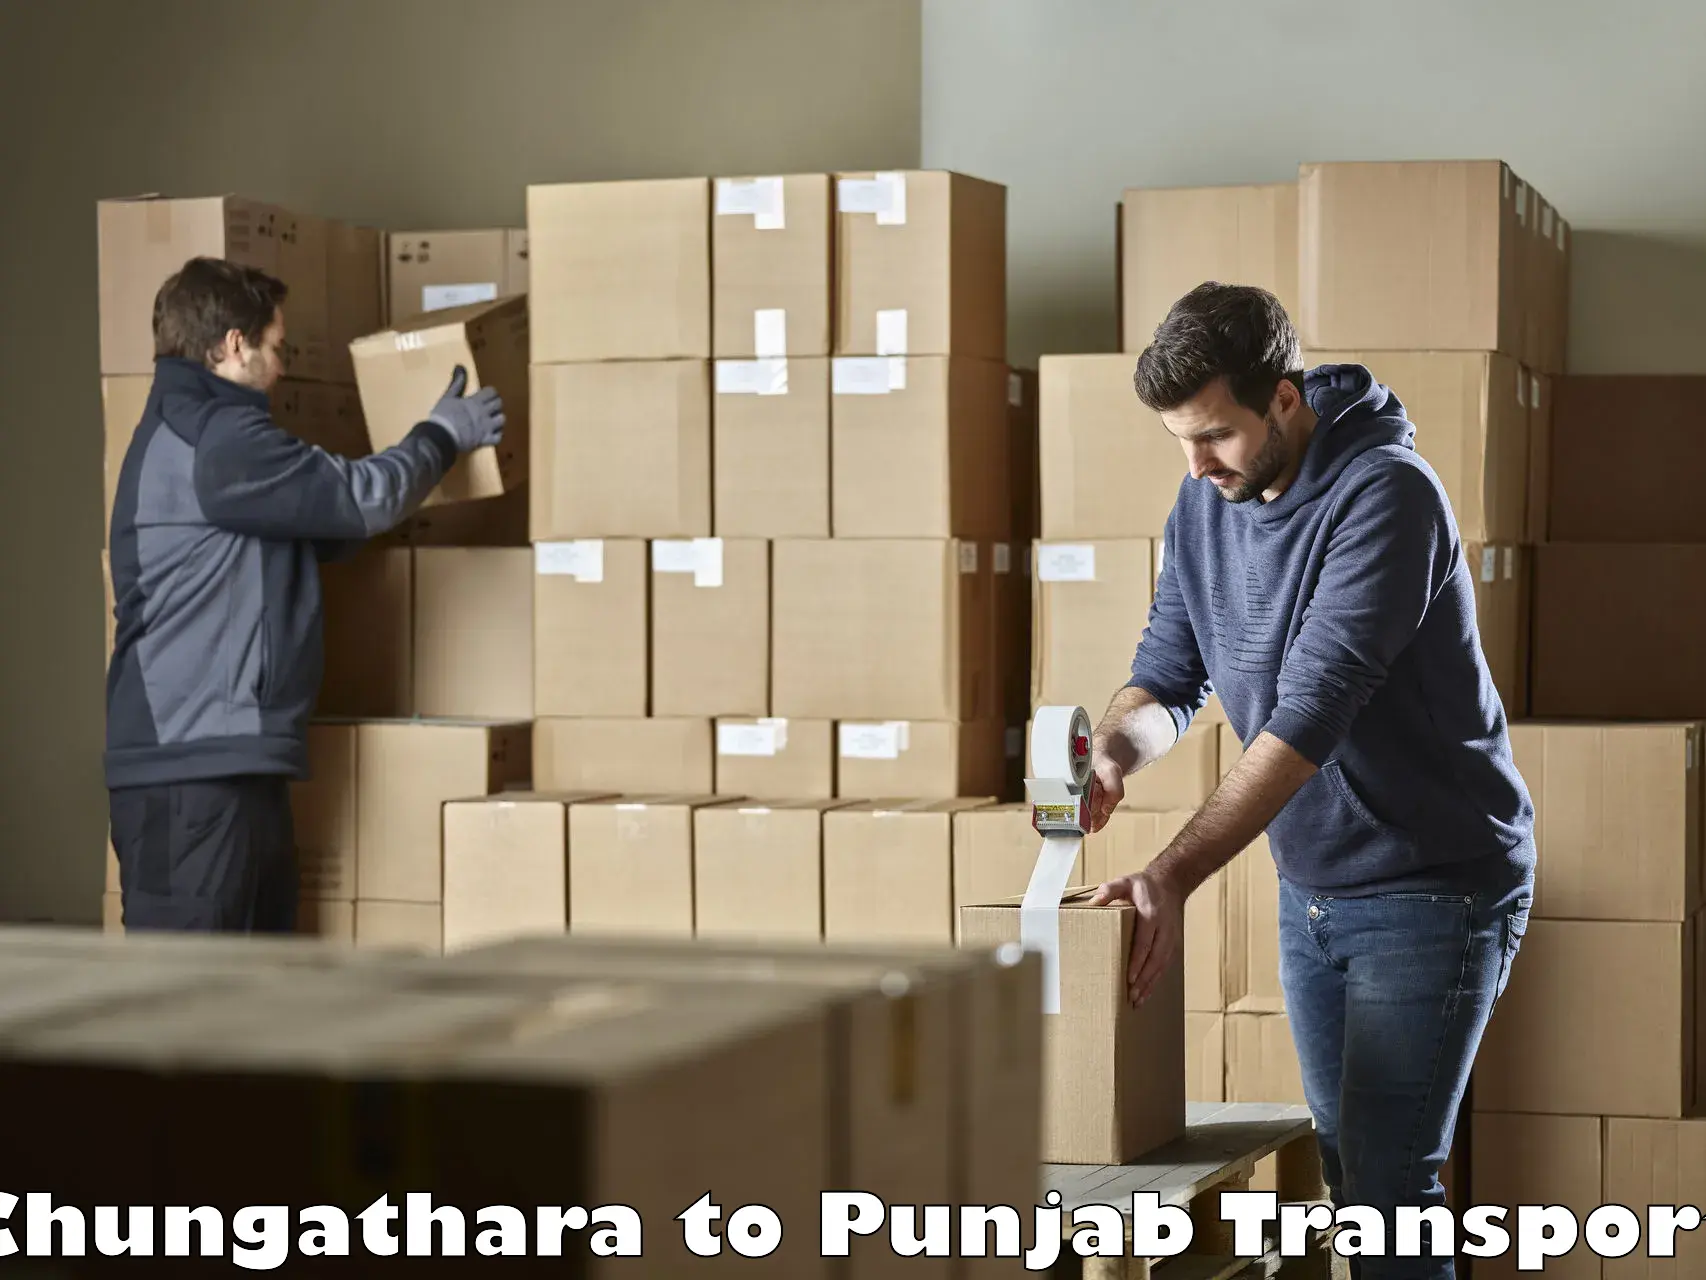 Road transport services Chungathara to IIT Ropar